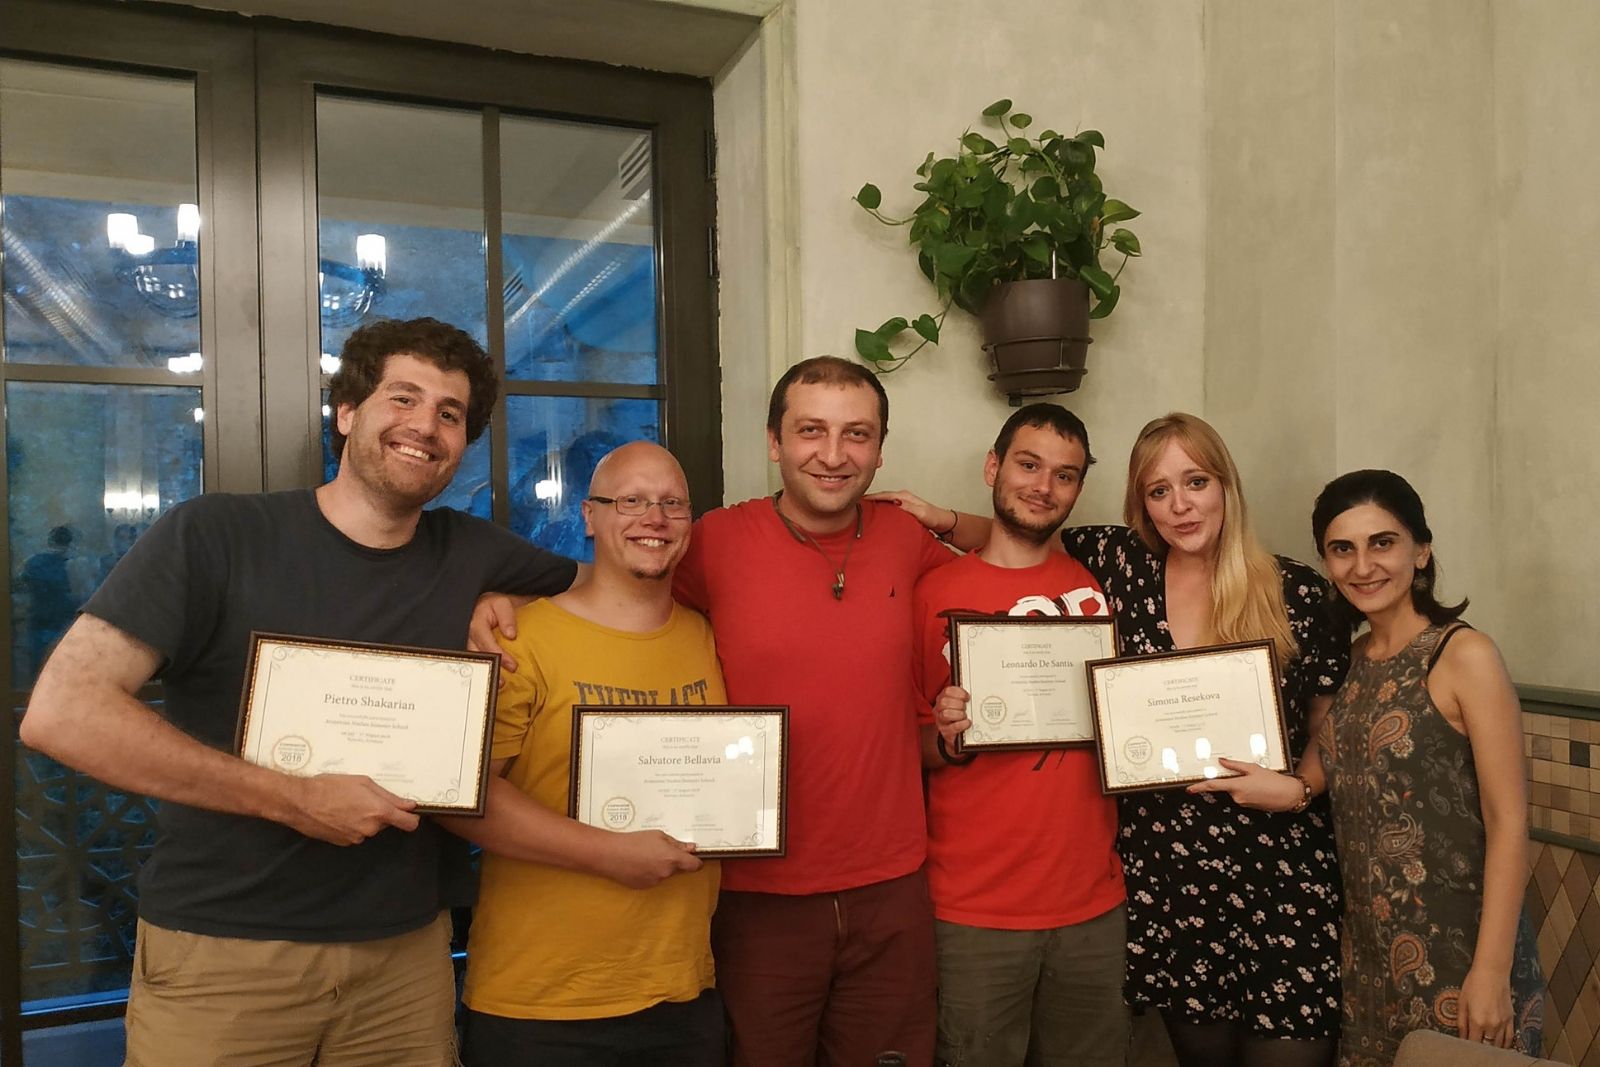 2018 Armenian language summer school participants received their certificates